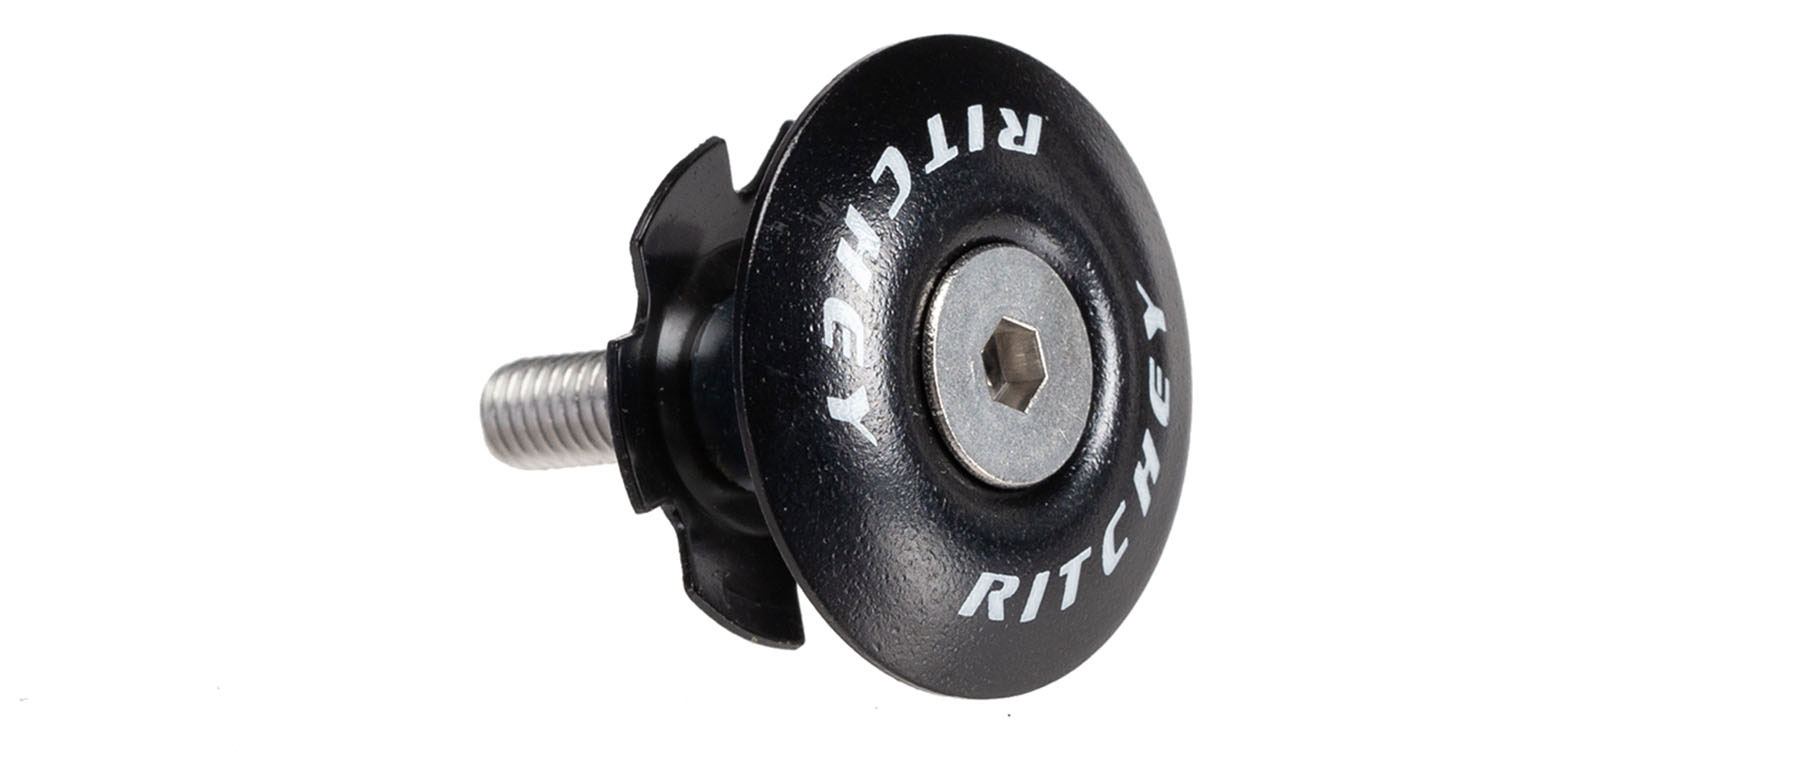 Ritchey Comp Drop-In Headset